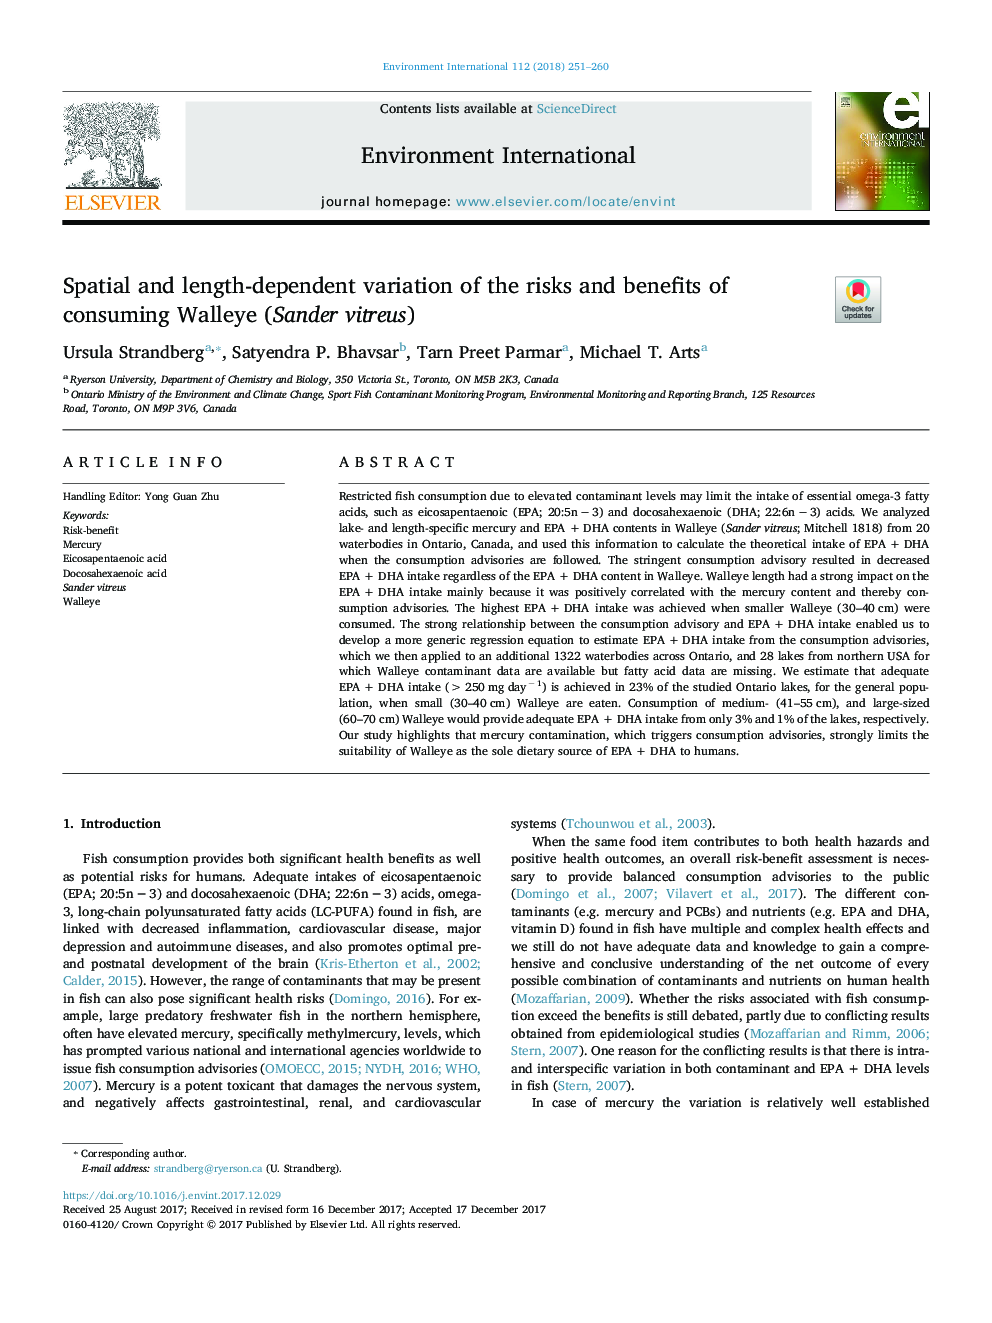 Spatial and length-dependent variation of the risks and benefits of consuming Walleye (Sander vitreus)